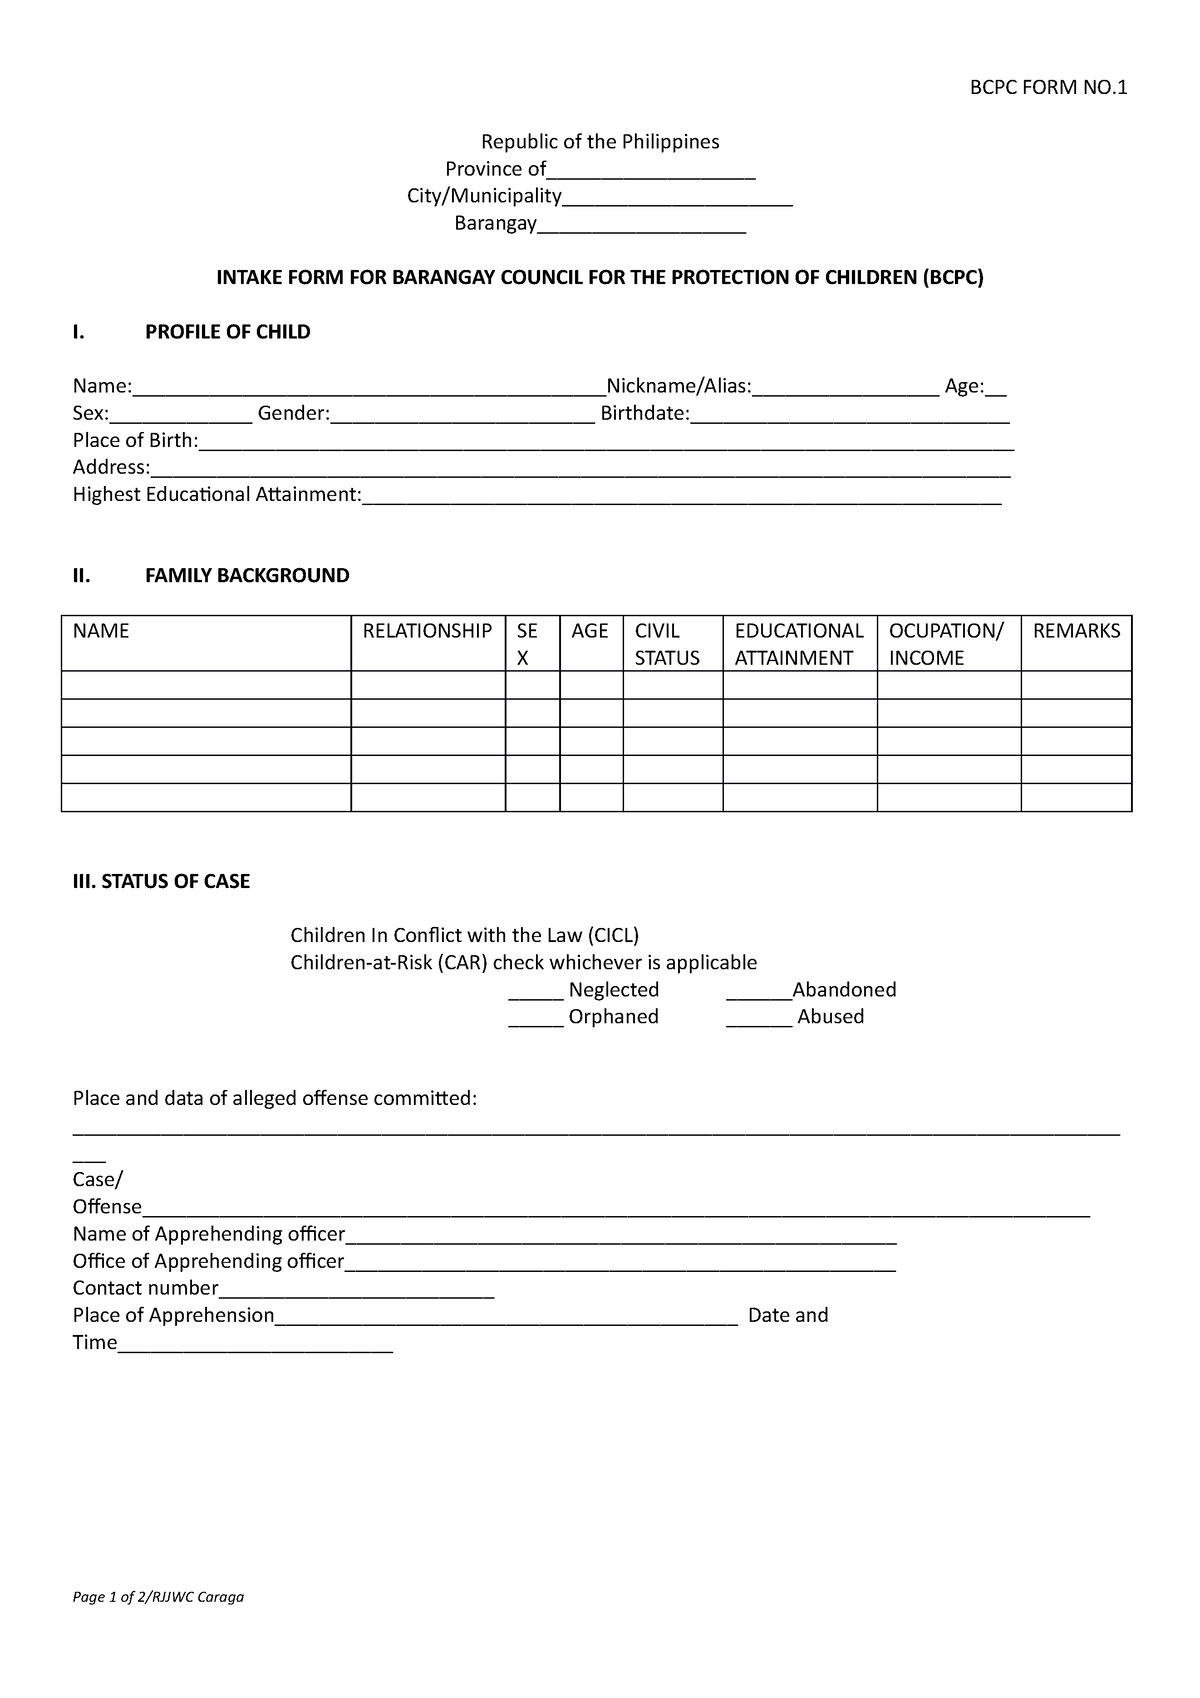 BCPC form 1 - BCPC Template - BCPC FORM NO. Republic of the Philippines ...